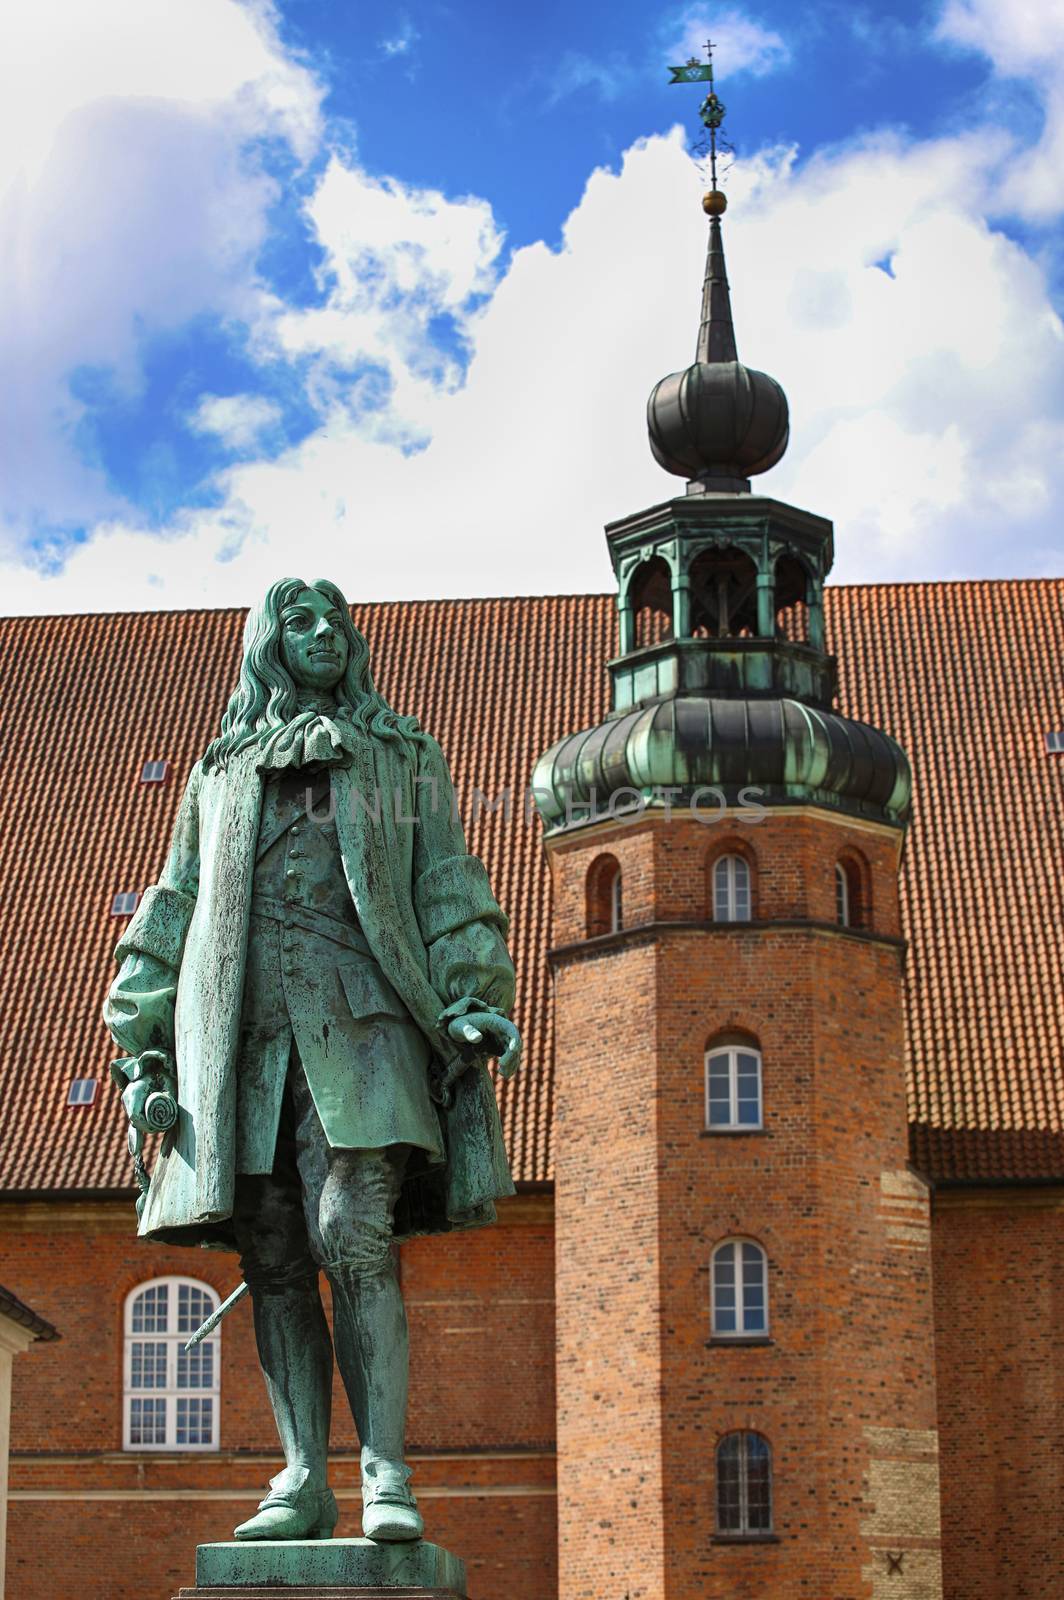 The statue of Chancellor Peder Griffenfeld and a tower in Copenh by vladacanon